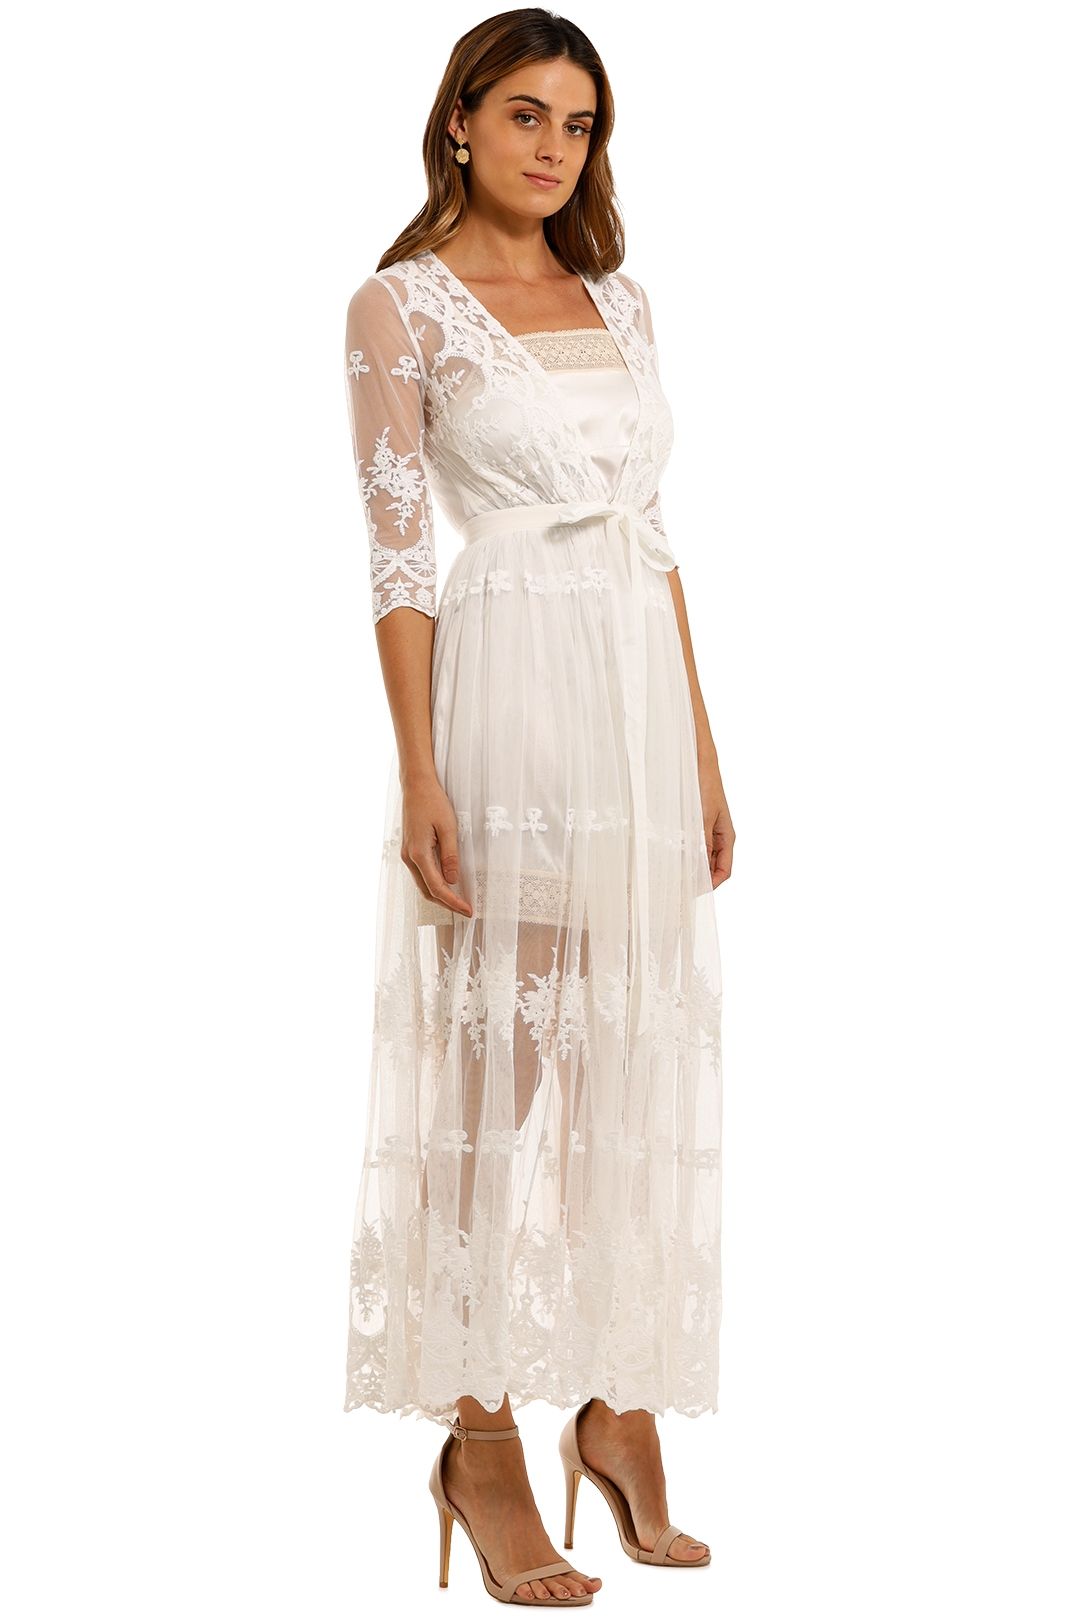 Spell Canyon Moon Mesh Duster off white